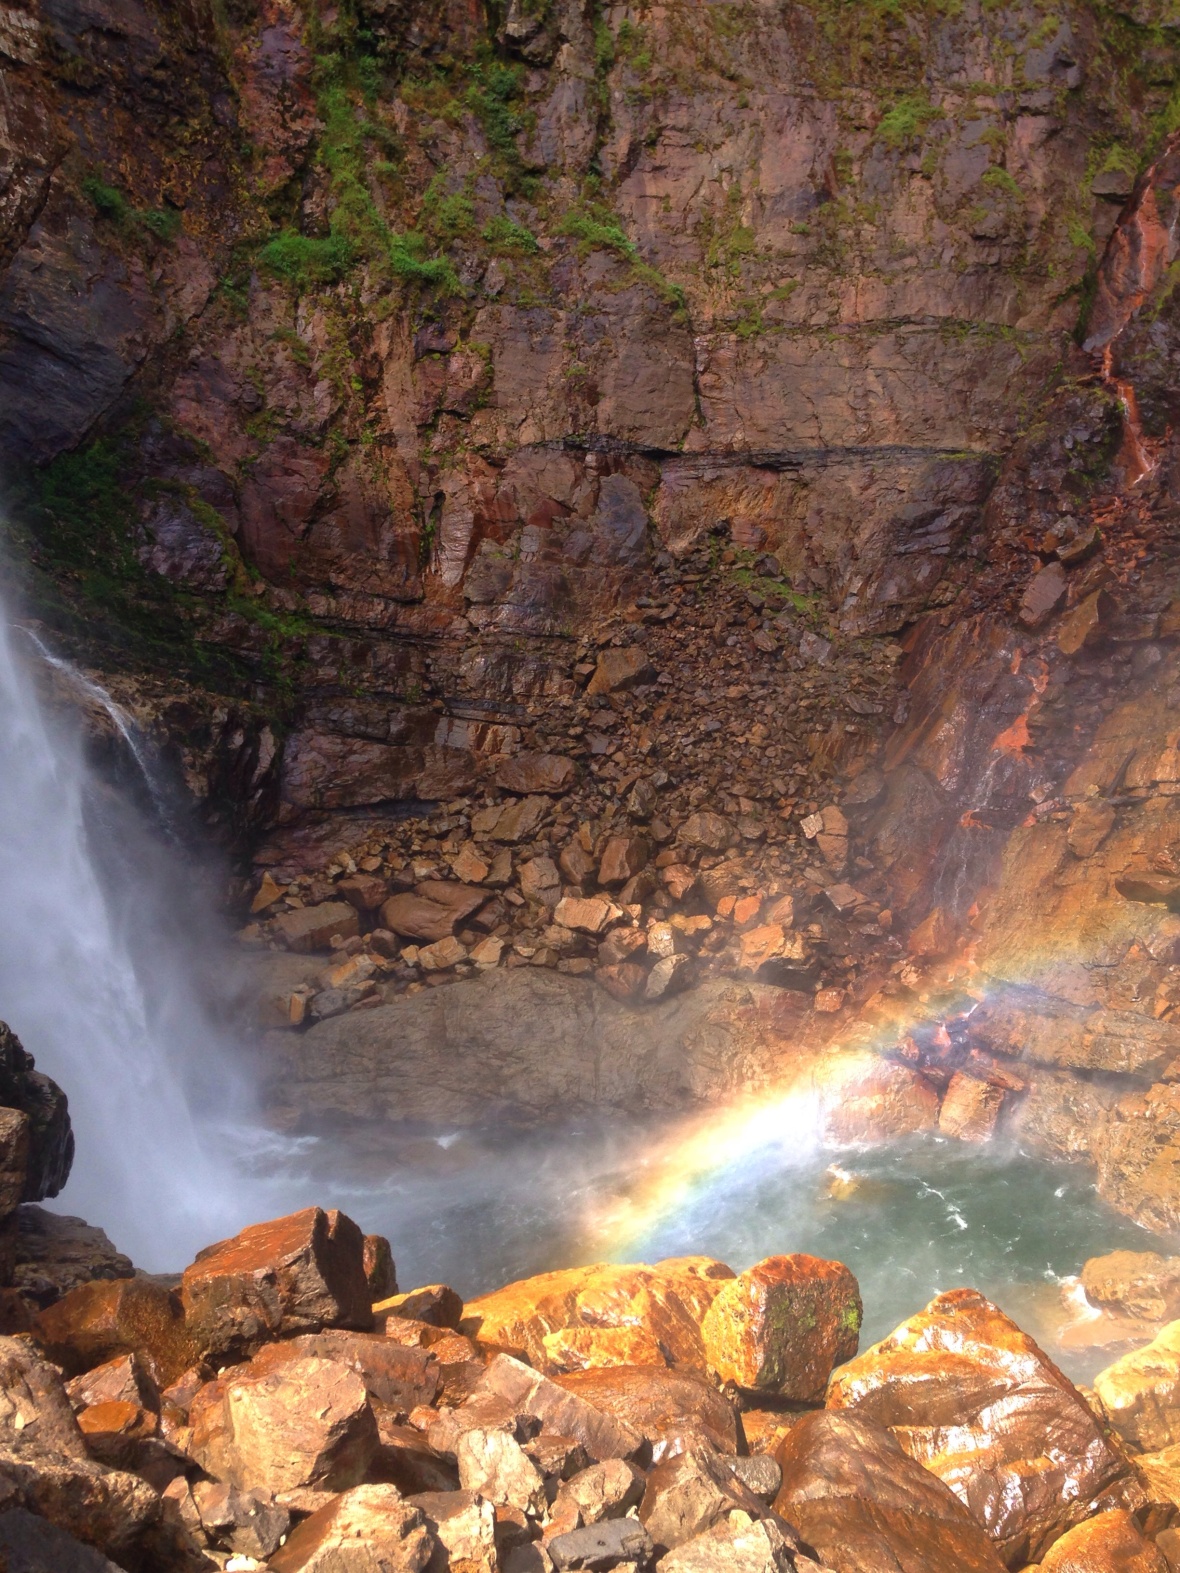 And when the sun hit the exploding mist at the bottom of the falls, it formed a rainbow.